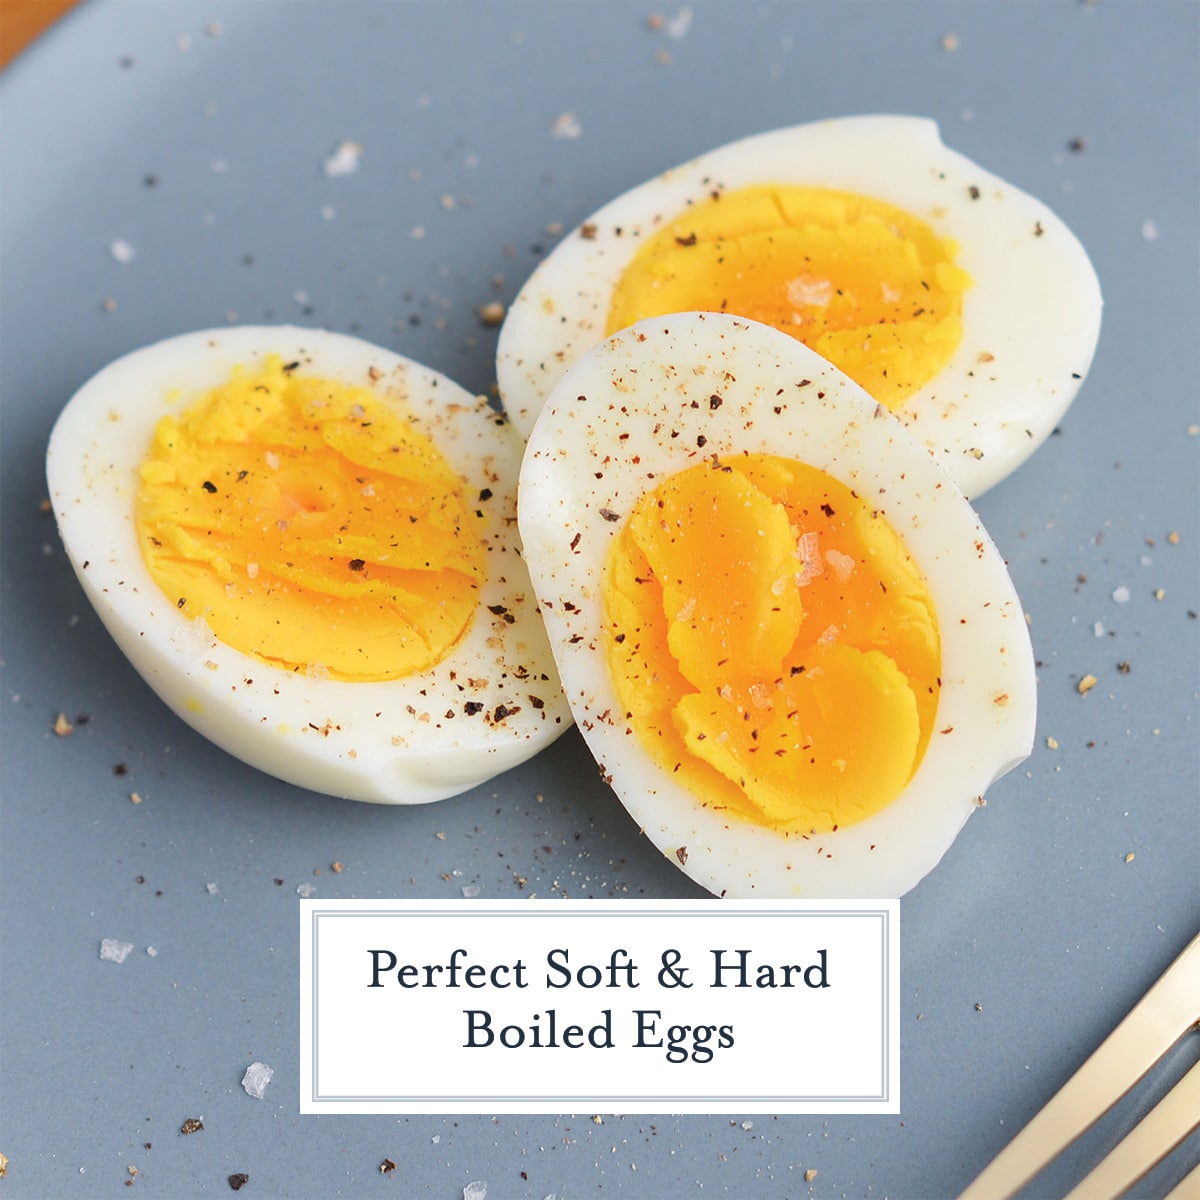 https://www.savoryexperiments.com/wp-content/uploads/2023/03/key-to-perfect-hard-boiled-eggs-FB.jpg